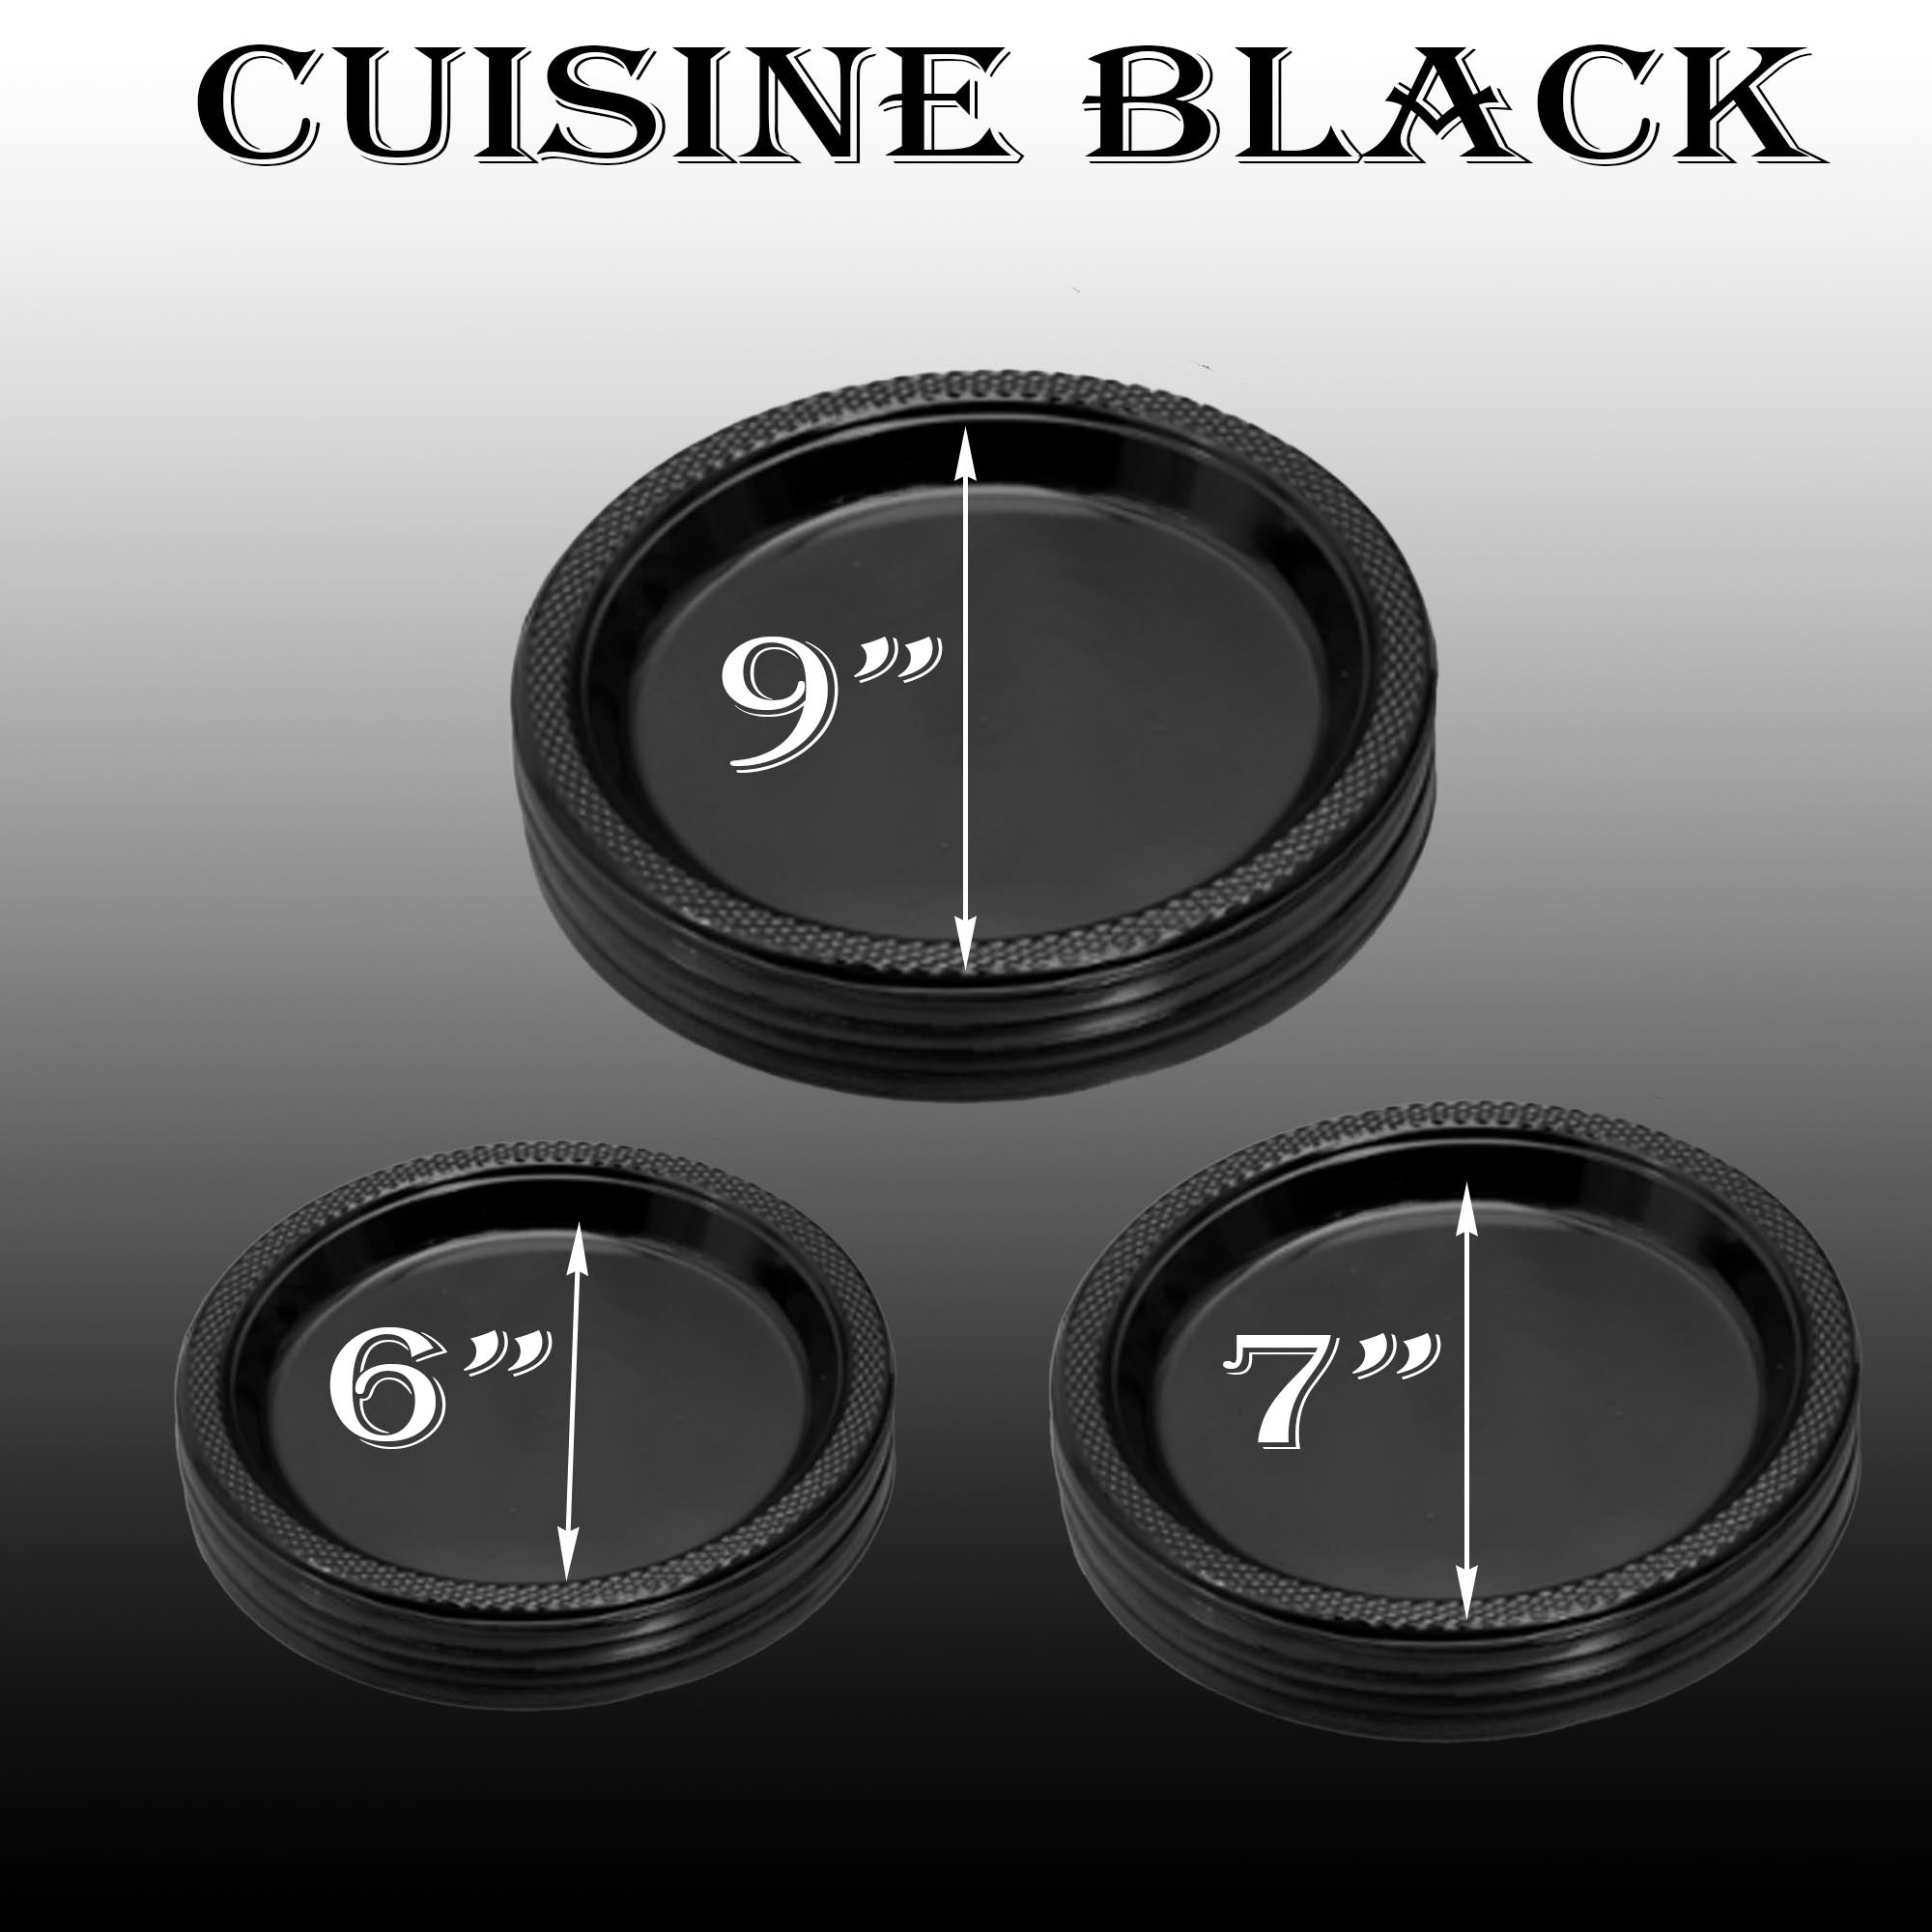 Stack of premium quality black dinner plates made of plastic, 9-inch plastic disposable cuisine black dinner plates, Black dinner plates suitable for all occasions